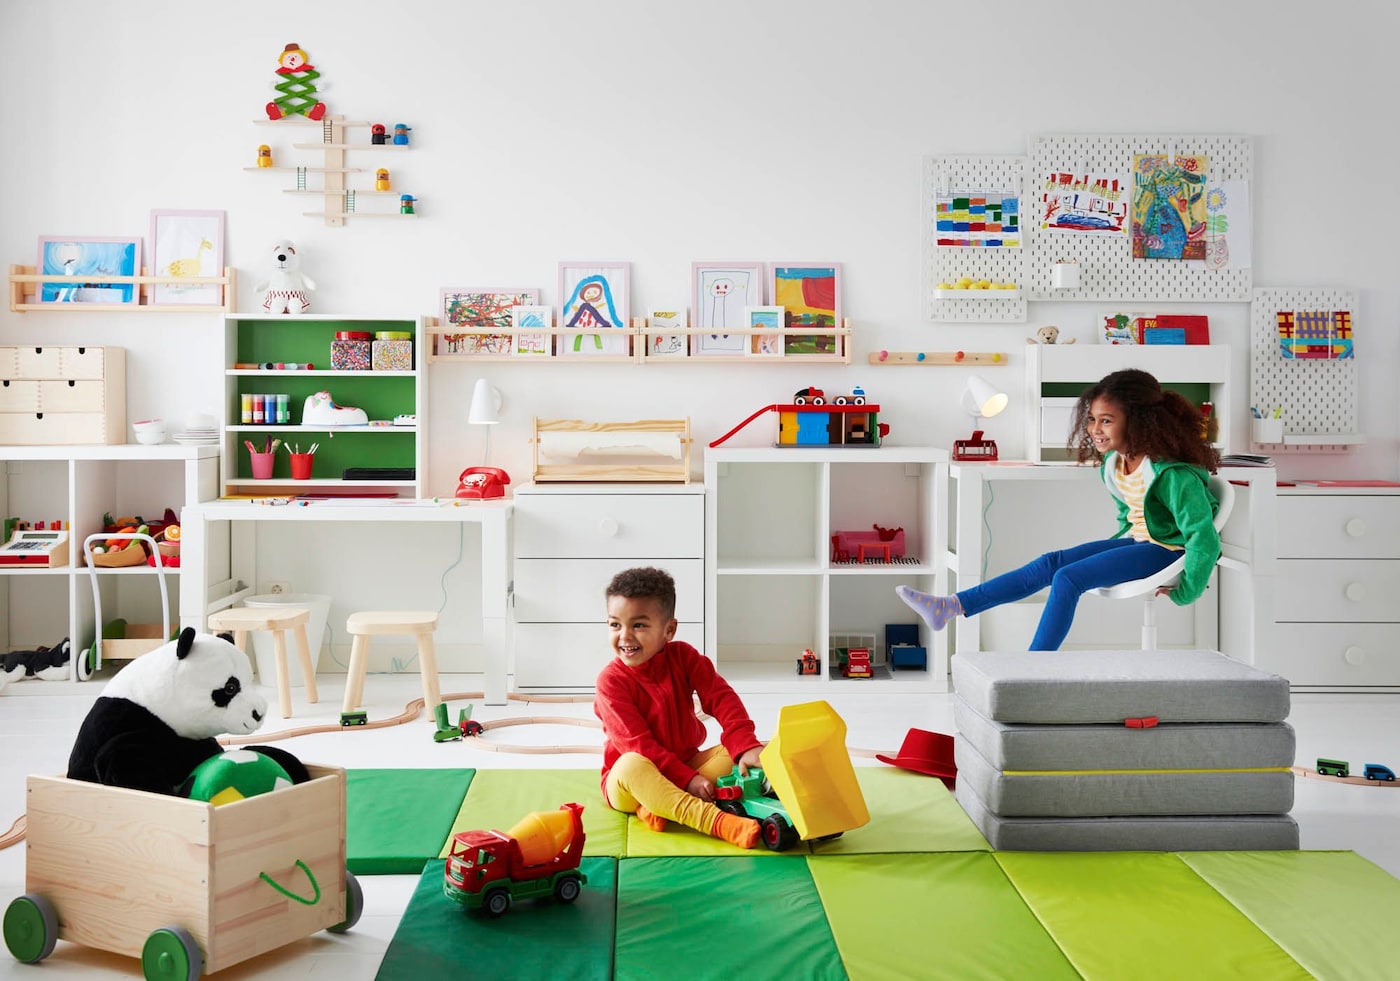 Two children play in a room with green mats on the floor and toys neatly arranged on white shelving on the wall behind.